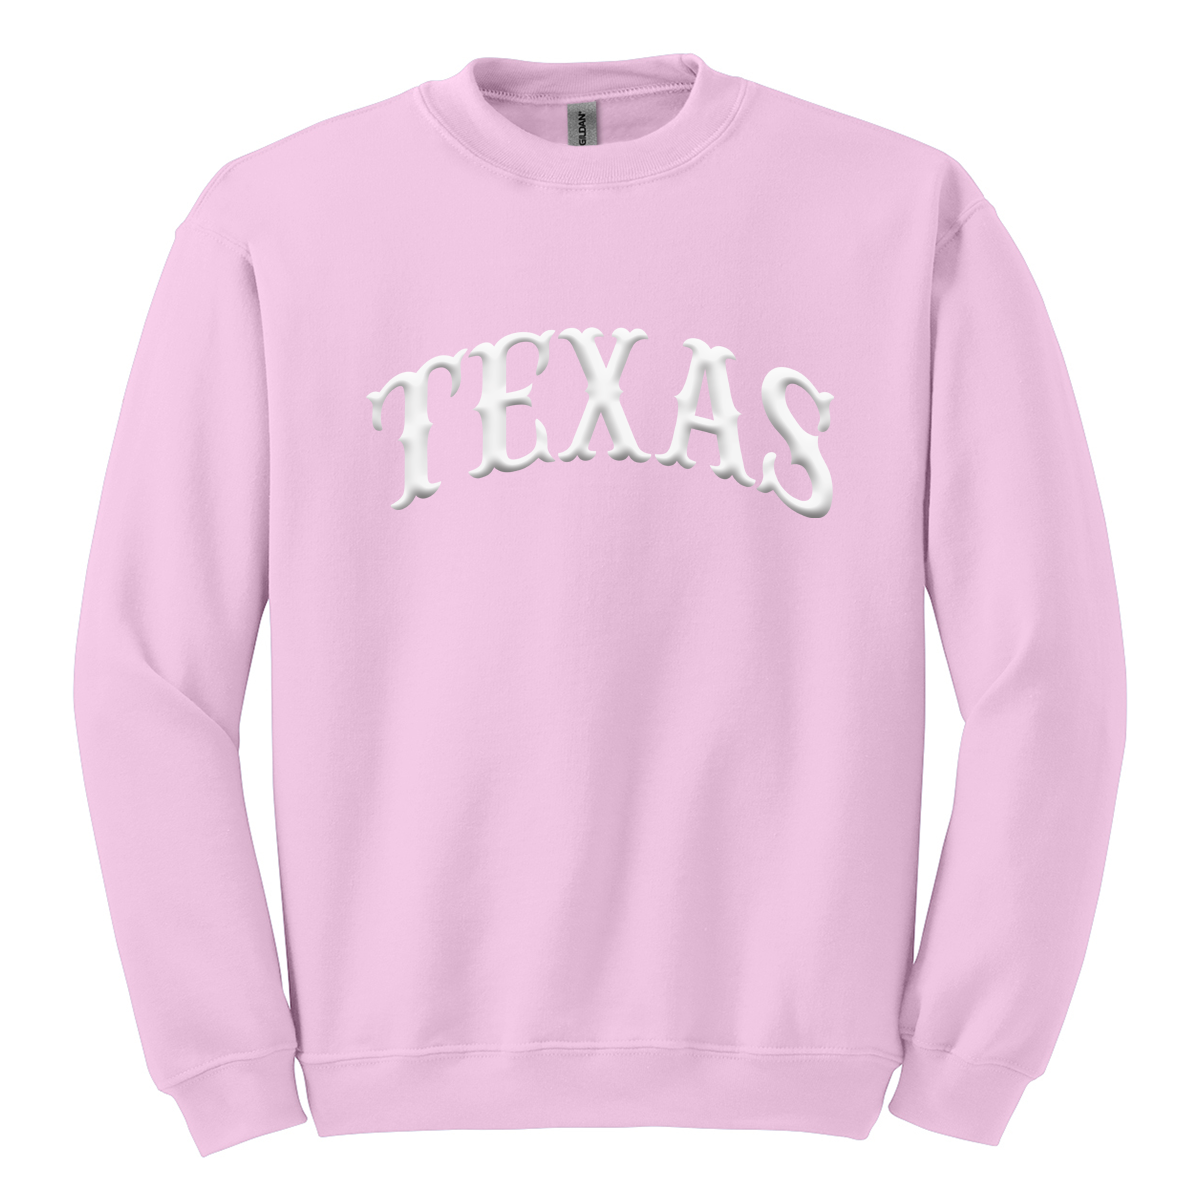 TEXAS PUFF SCREENPRINT ON A GILDAN CREWNECK FLEECE SWEATER WESTERN STYLE LIGHT PINK COLOR WITH A WHITE INK ARCH TEXAS GRAPHIC